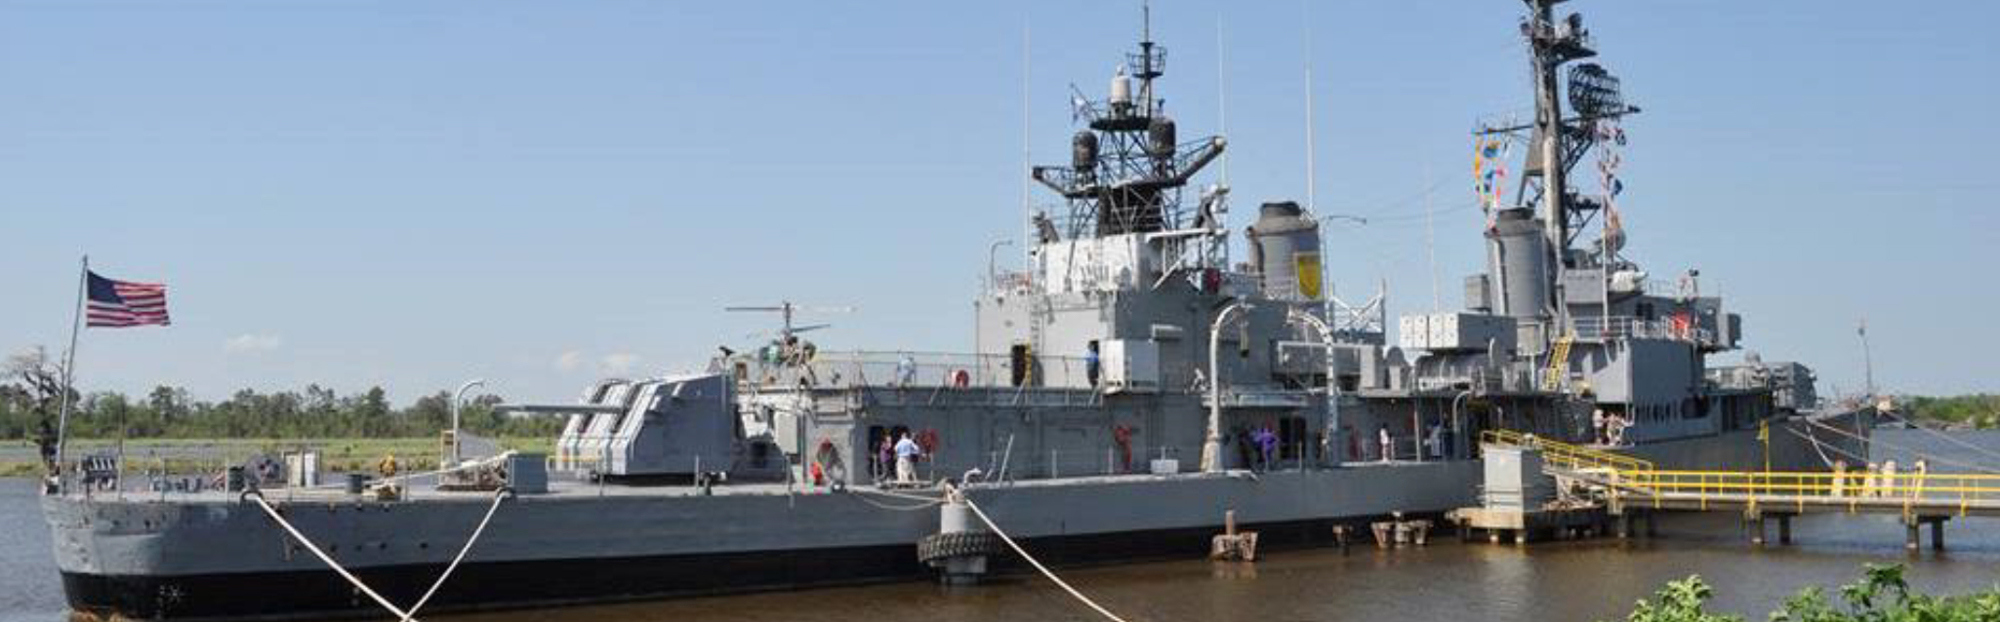 The USS Orleck DD-886 Naval Museum in  Lake Charles, Louisiana.